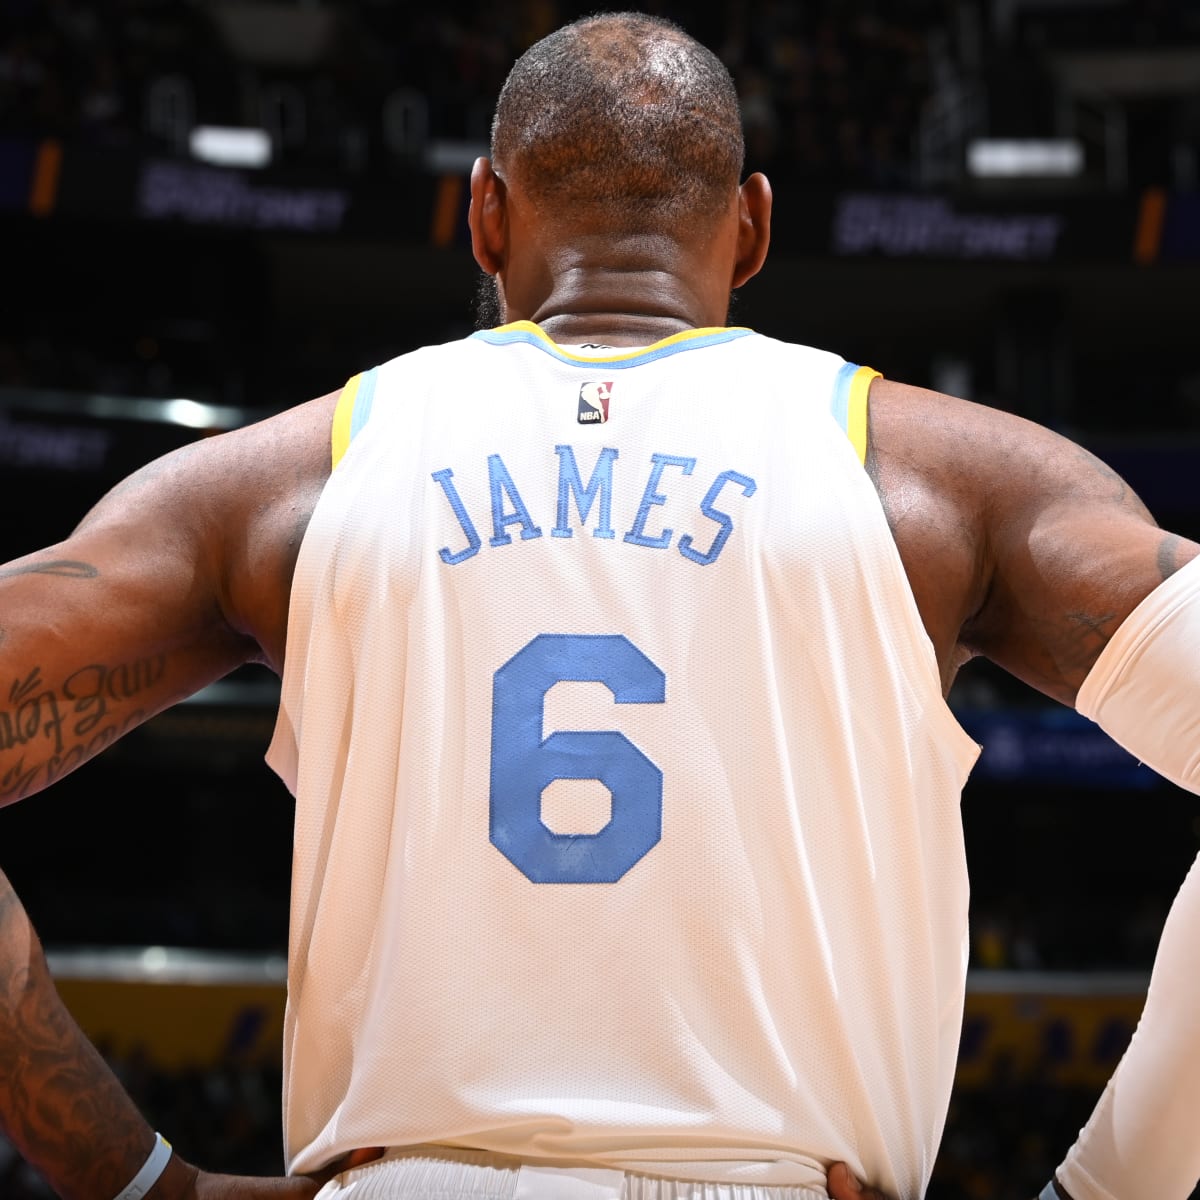 LeBron James plans to change jersey from No. 23 to No. 6 next